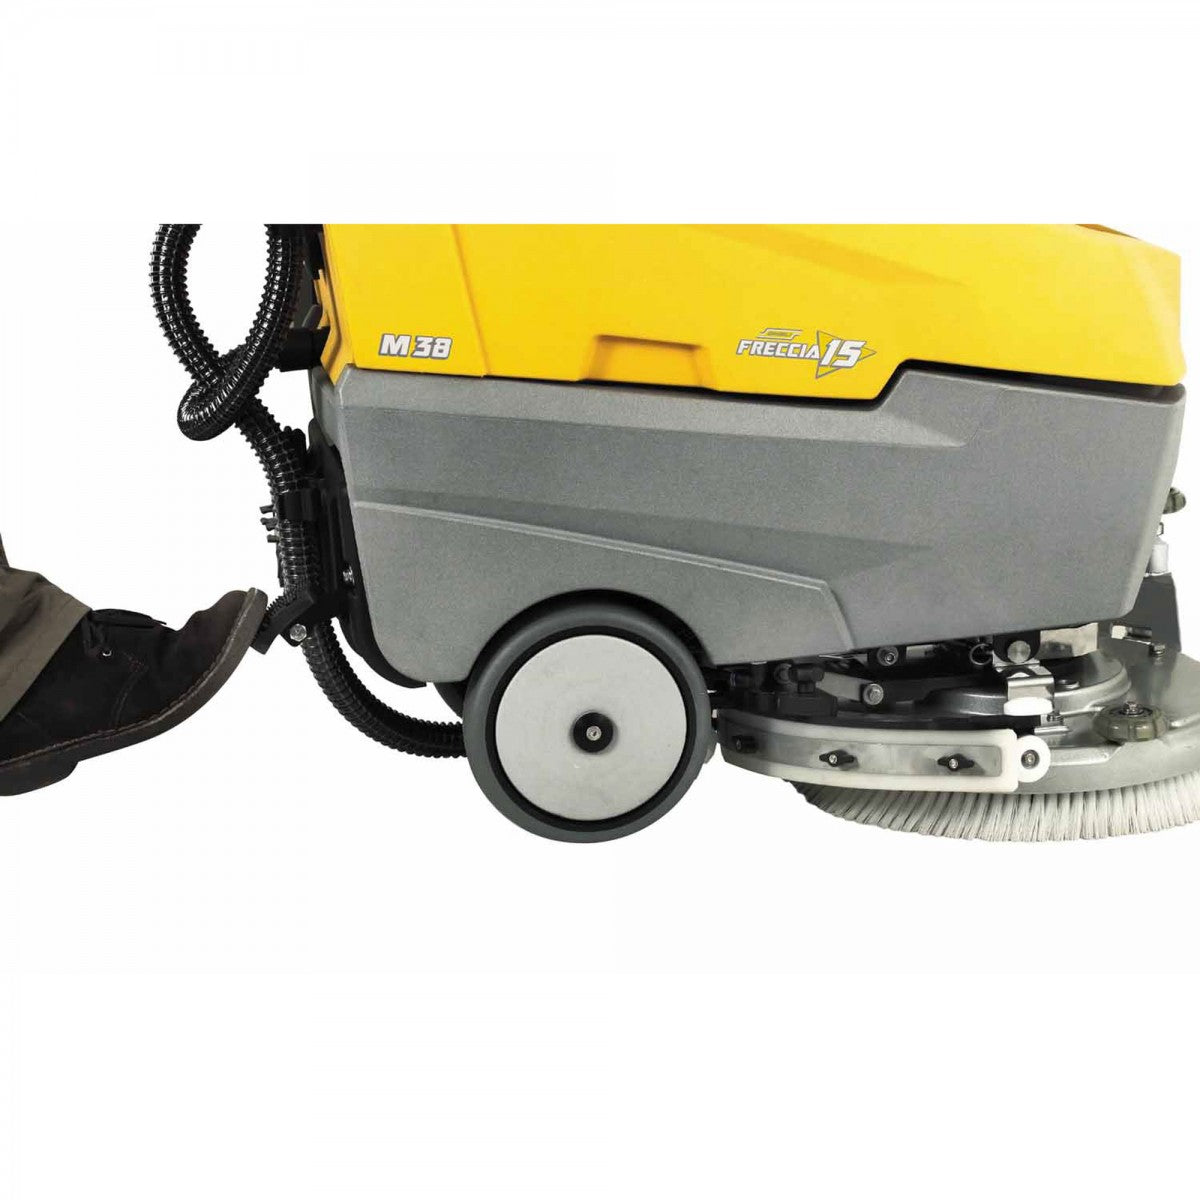 Autoscrubber - 15"Cleaning Path - with 15m Power Cord